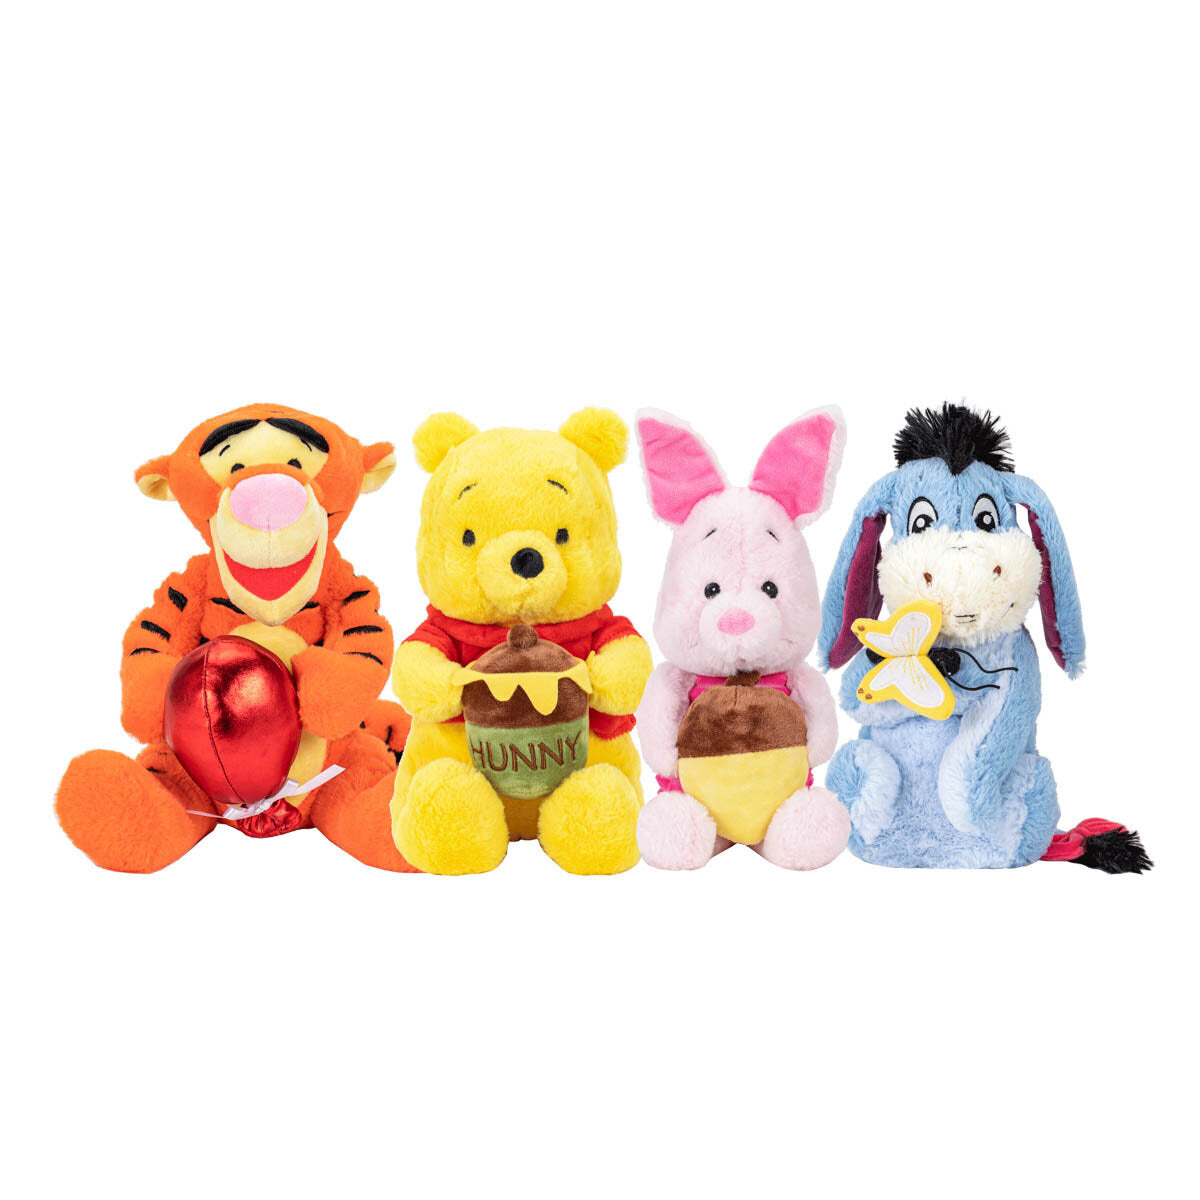 Winnie the Pooh and Friends 4件公仔套裝